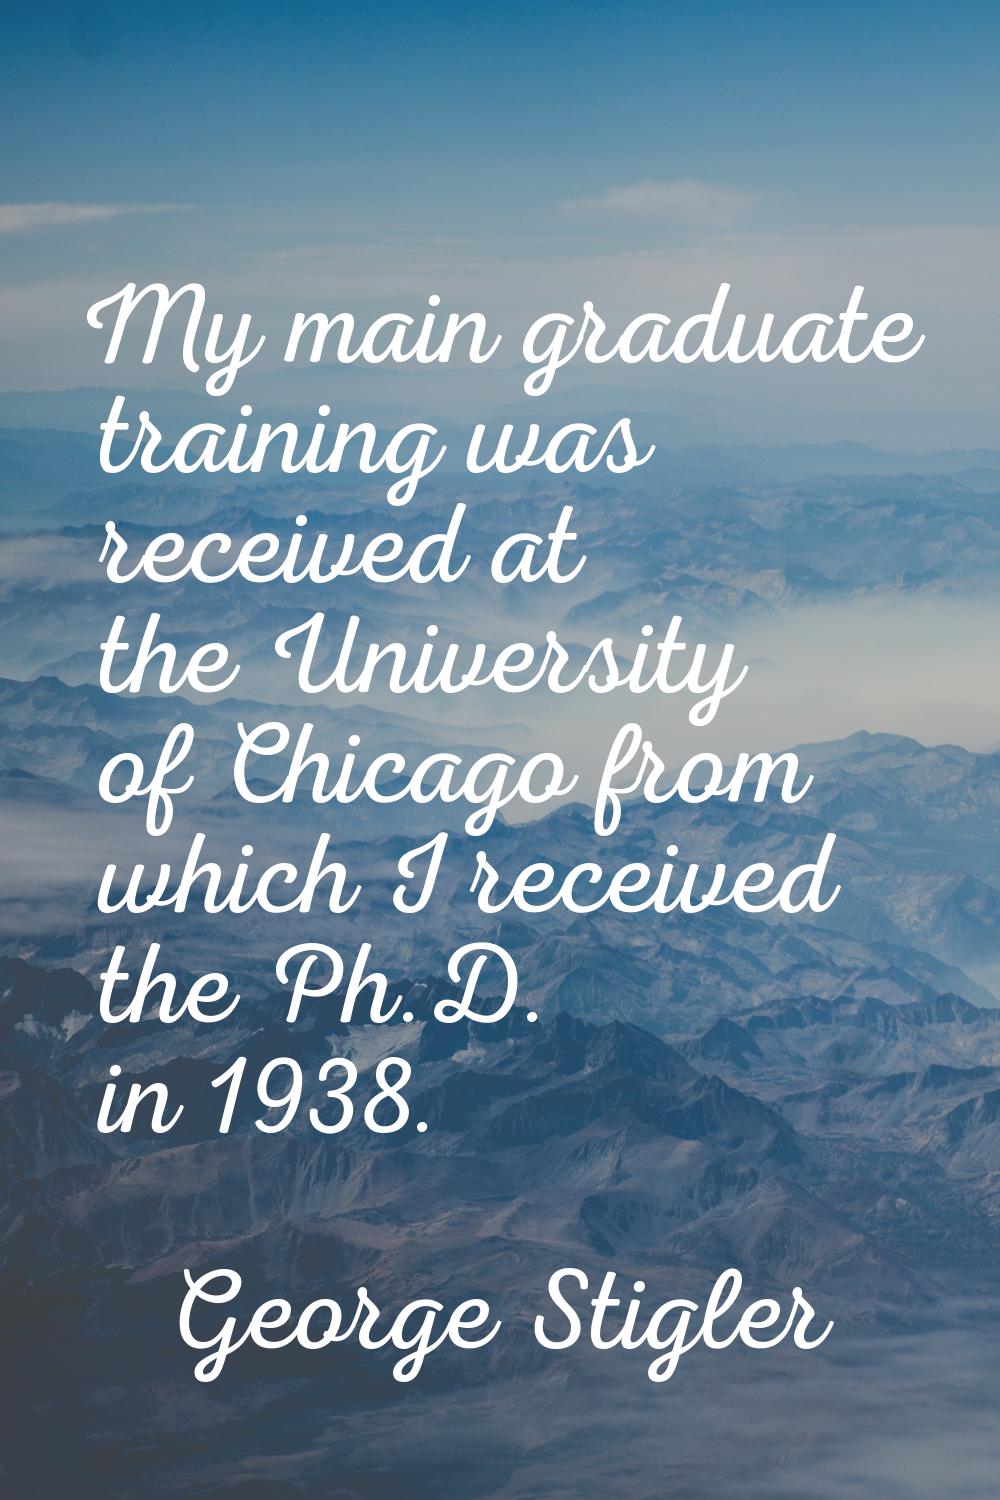 My main graduate training was received at the University of Chicago from which I received the Ph.D.